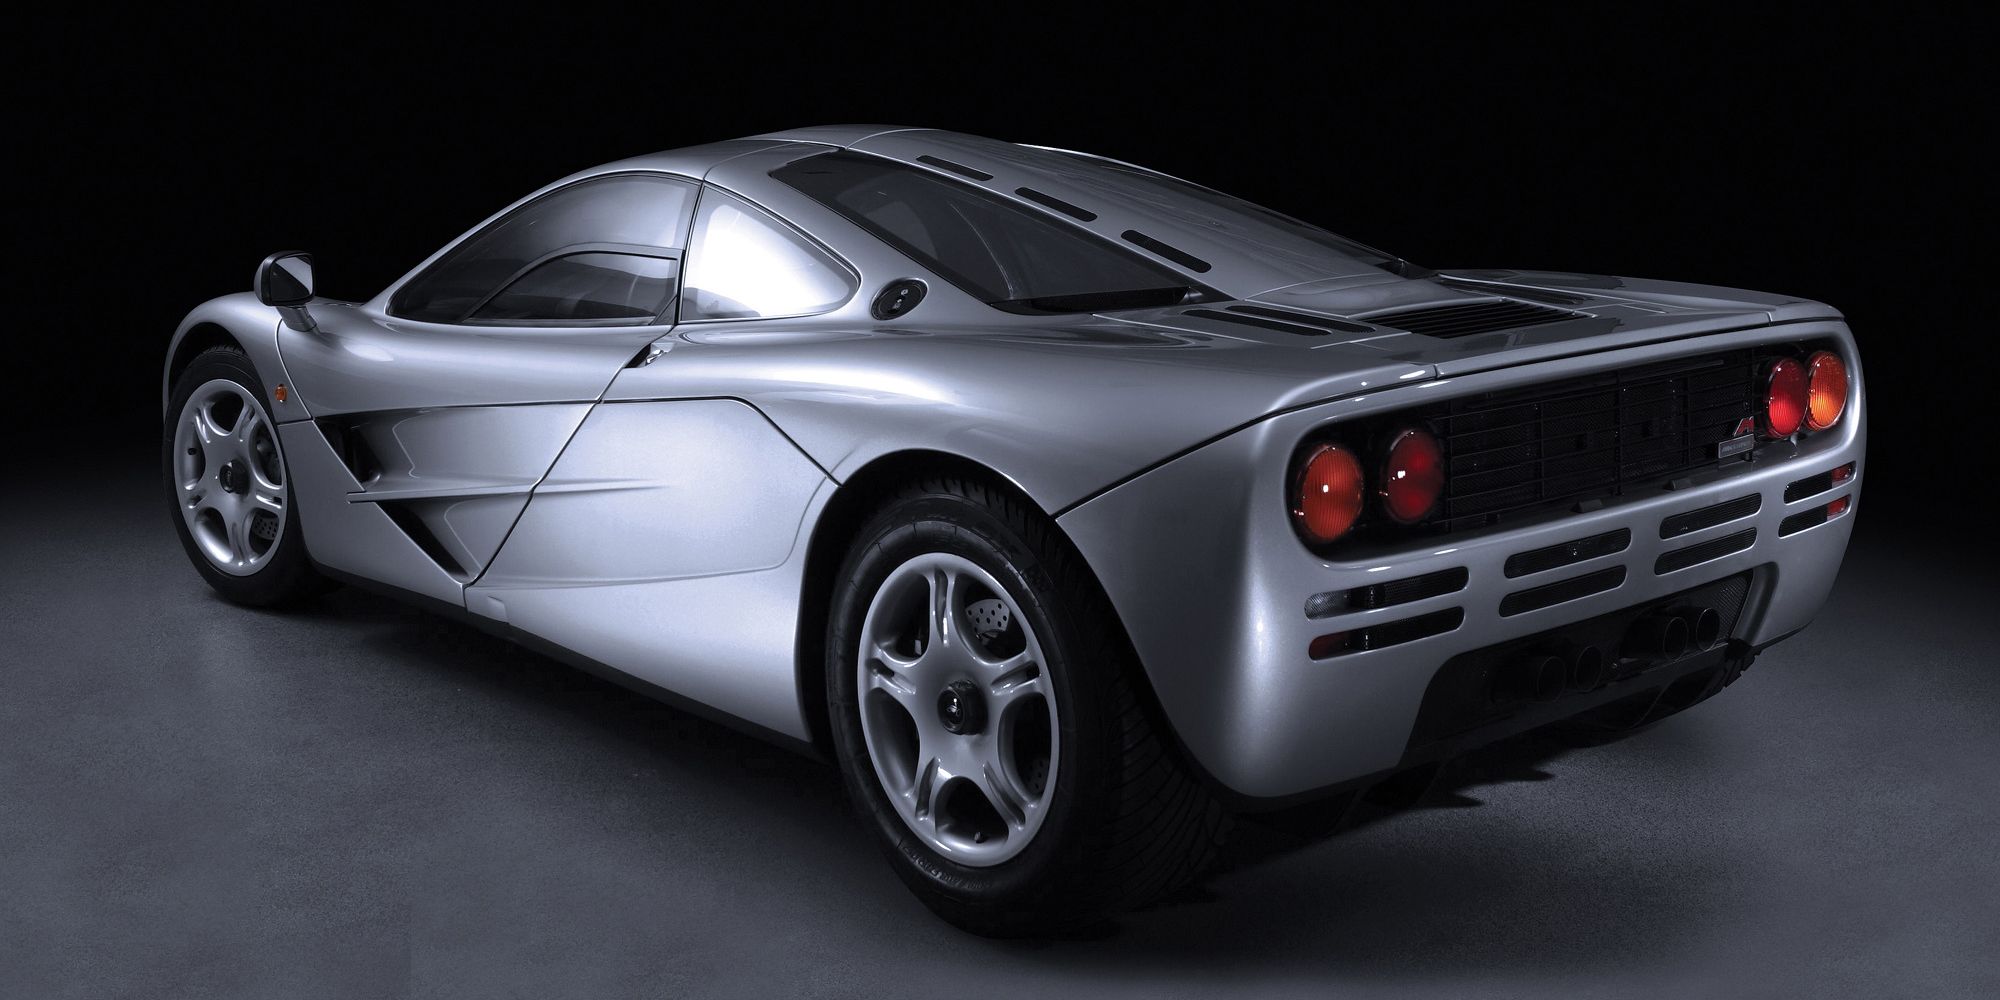 Rear 3/4 view of the McLaren F1